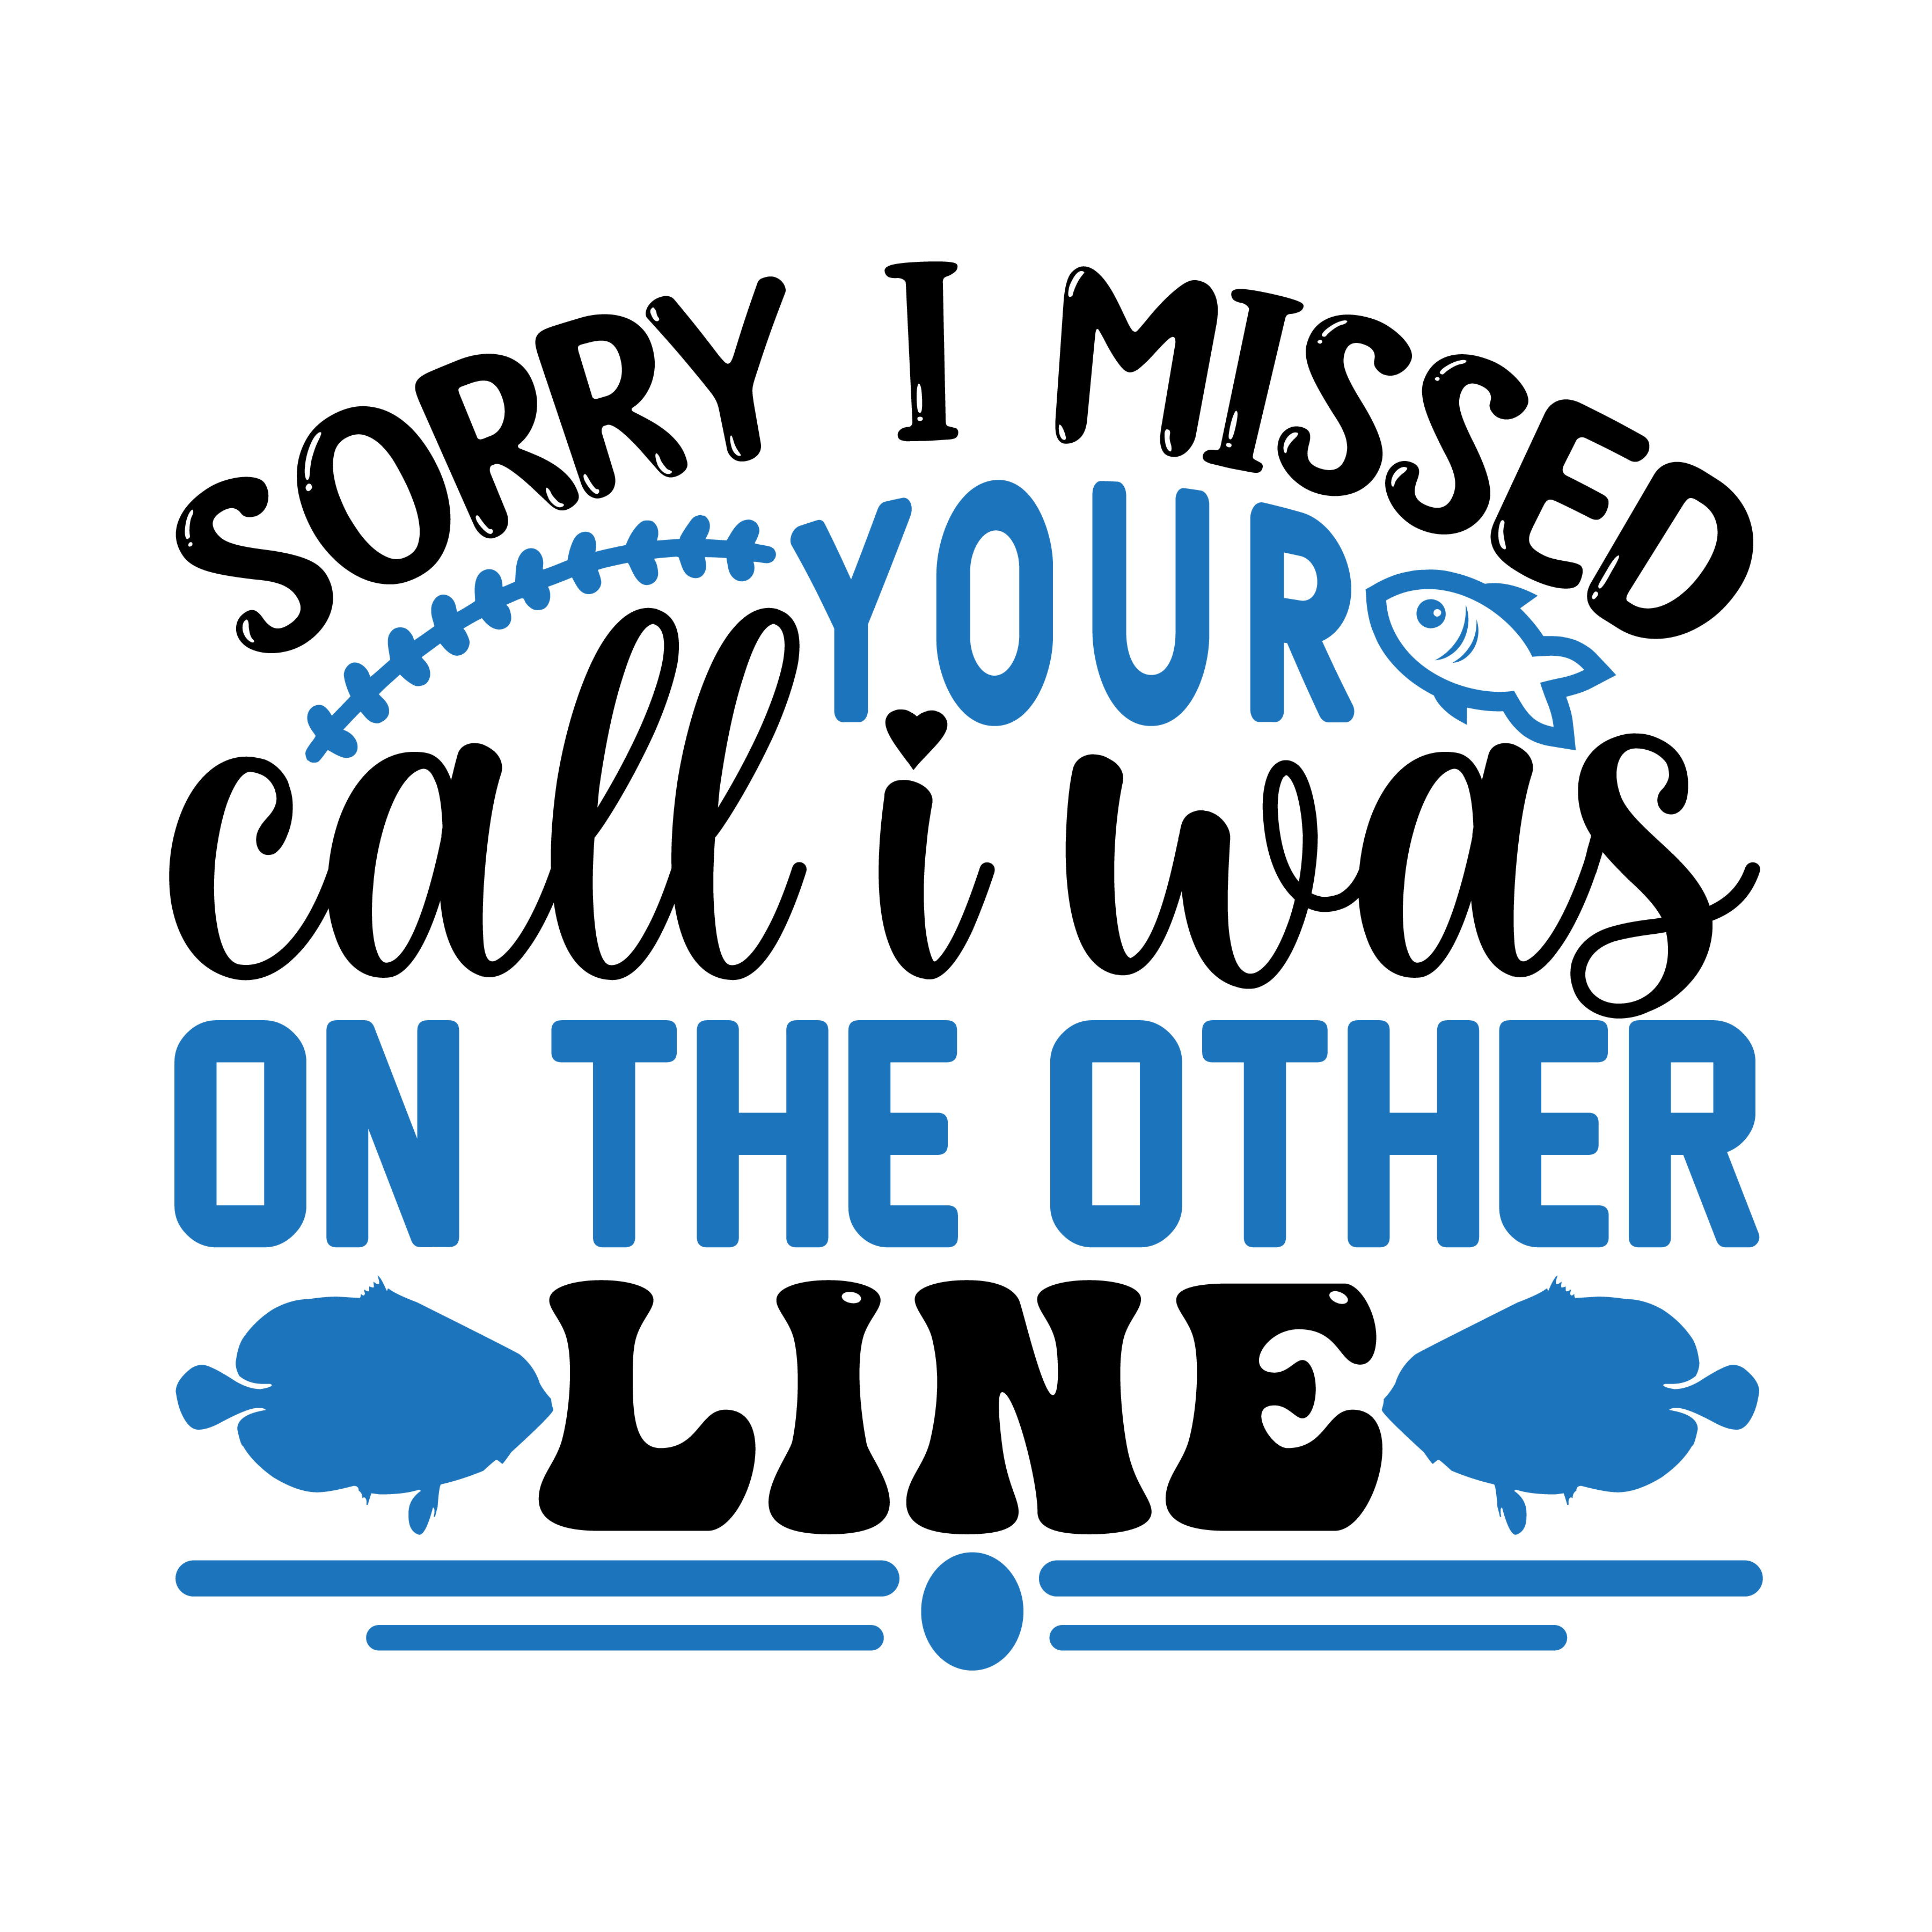 sorry i missed your call i was on the other line, Fishing quotes, fishing sayings, Cricut designs, free, clip art, svg file, template, pattern, stencil, silhouette, cut file, design space, short, funny, shirt, cup, DIY crafts and projects, embroidery